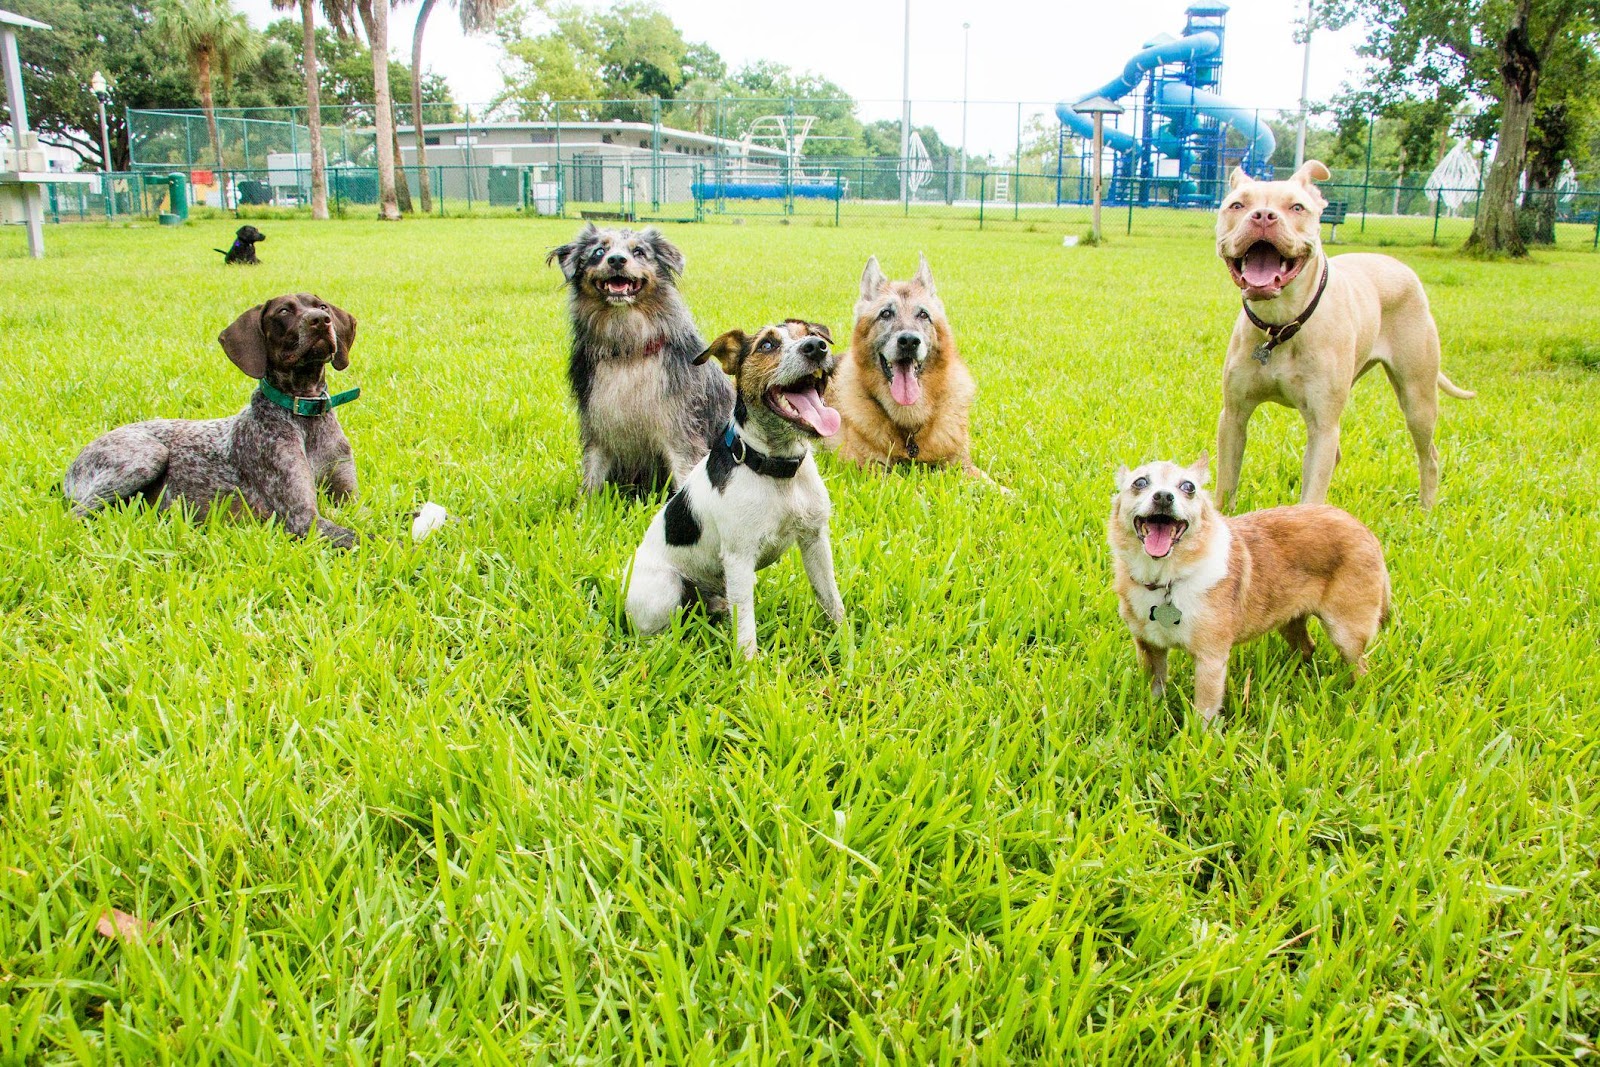 How To Keep Dogs Healthy And Safe At City's Dog Park